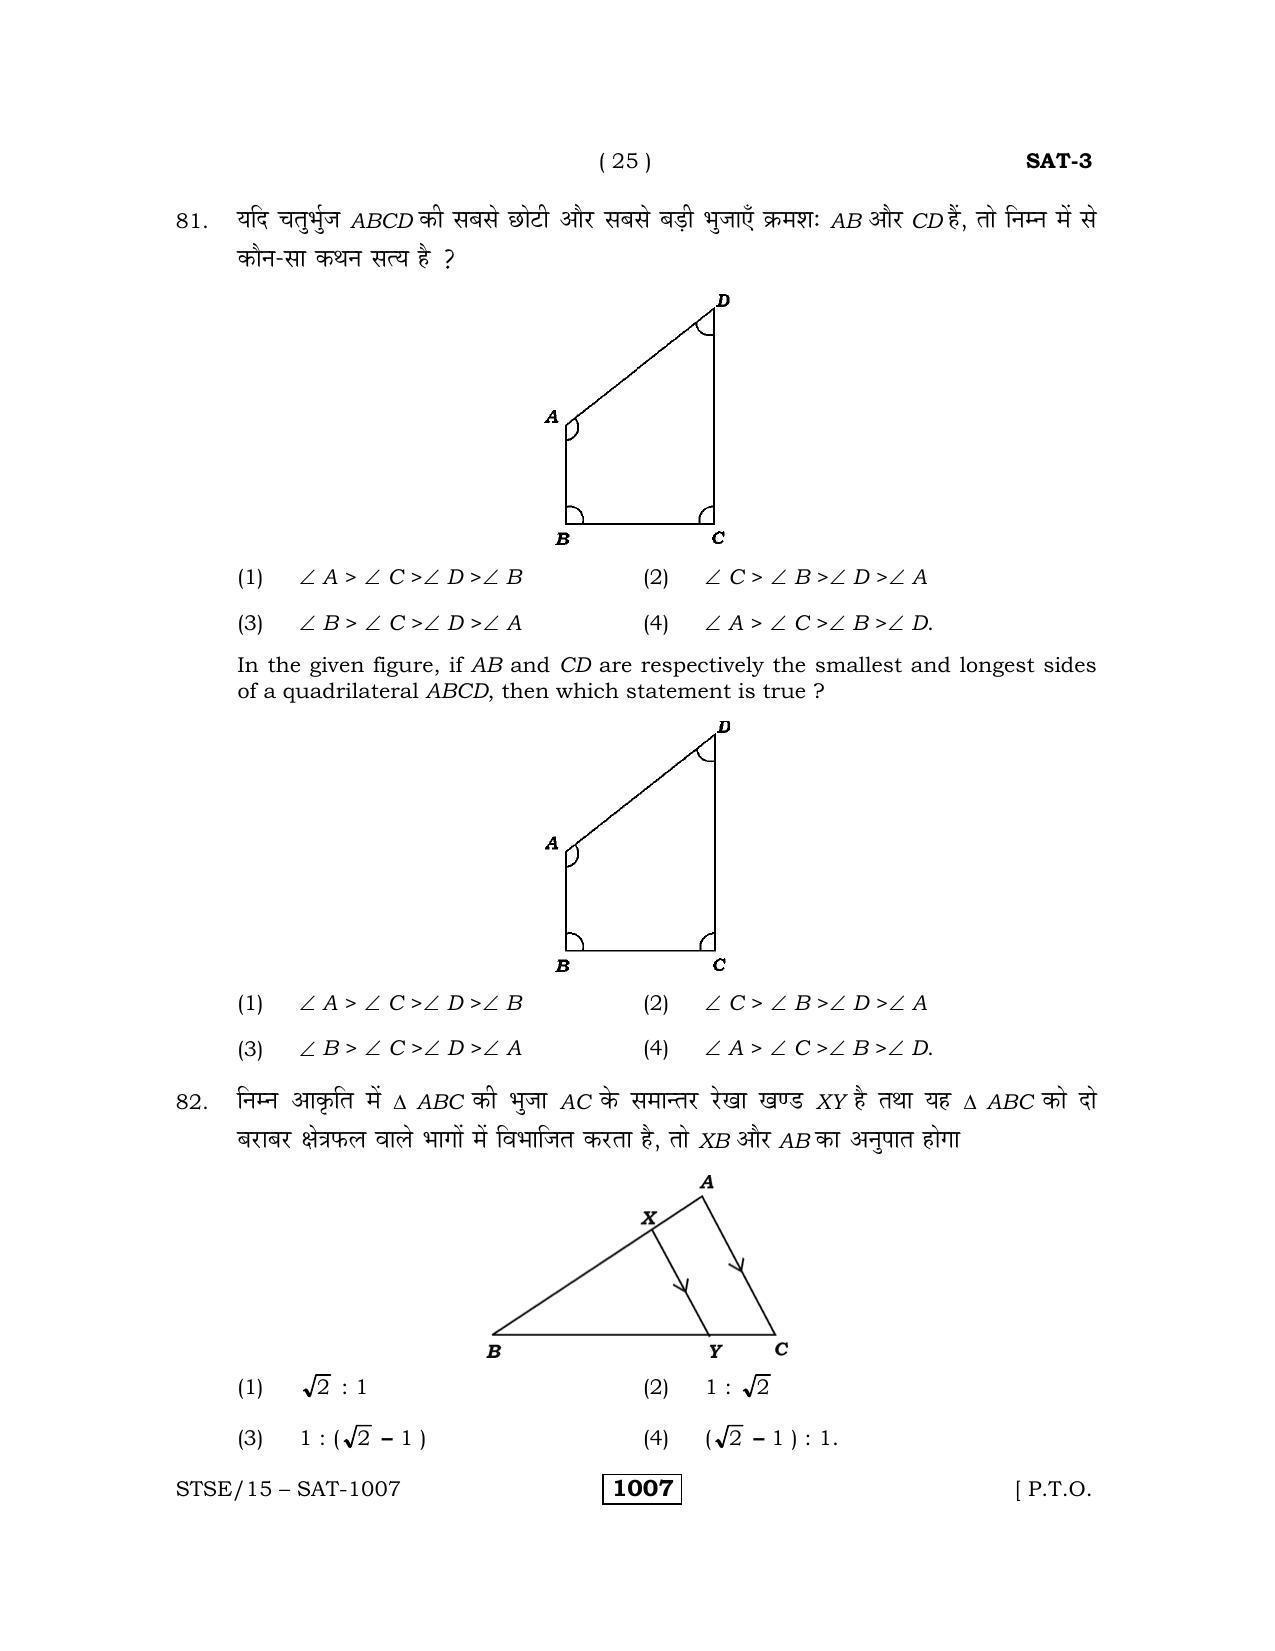 Rajasthan STSE Class 12 (Scholastic Aptitude Test) Question Paper 2015 - Page 25